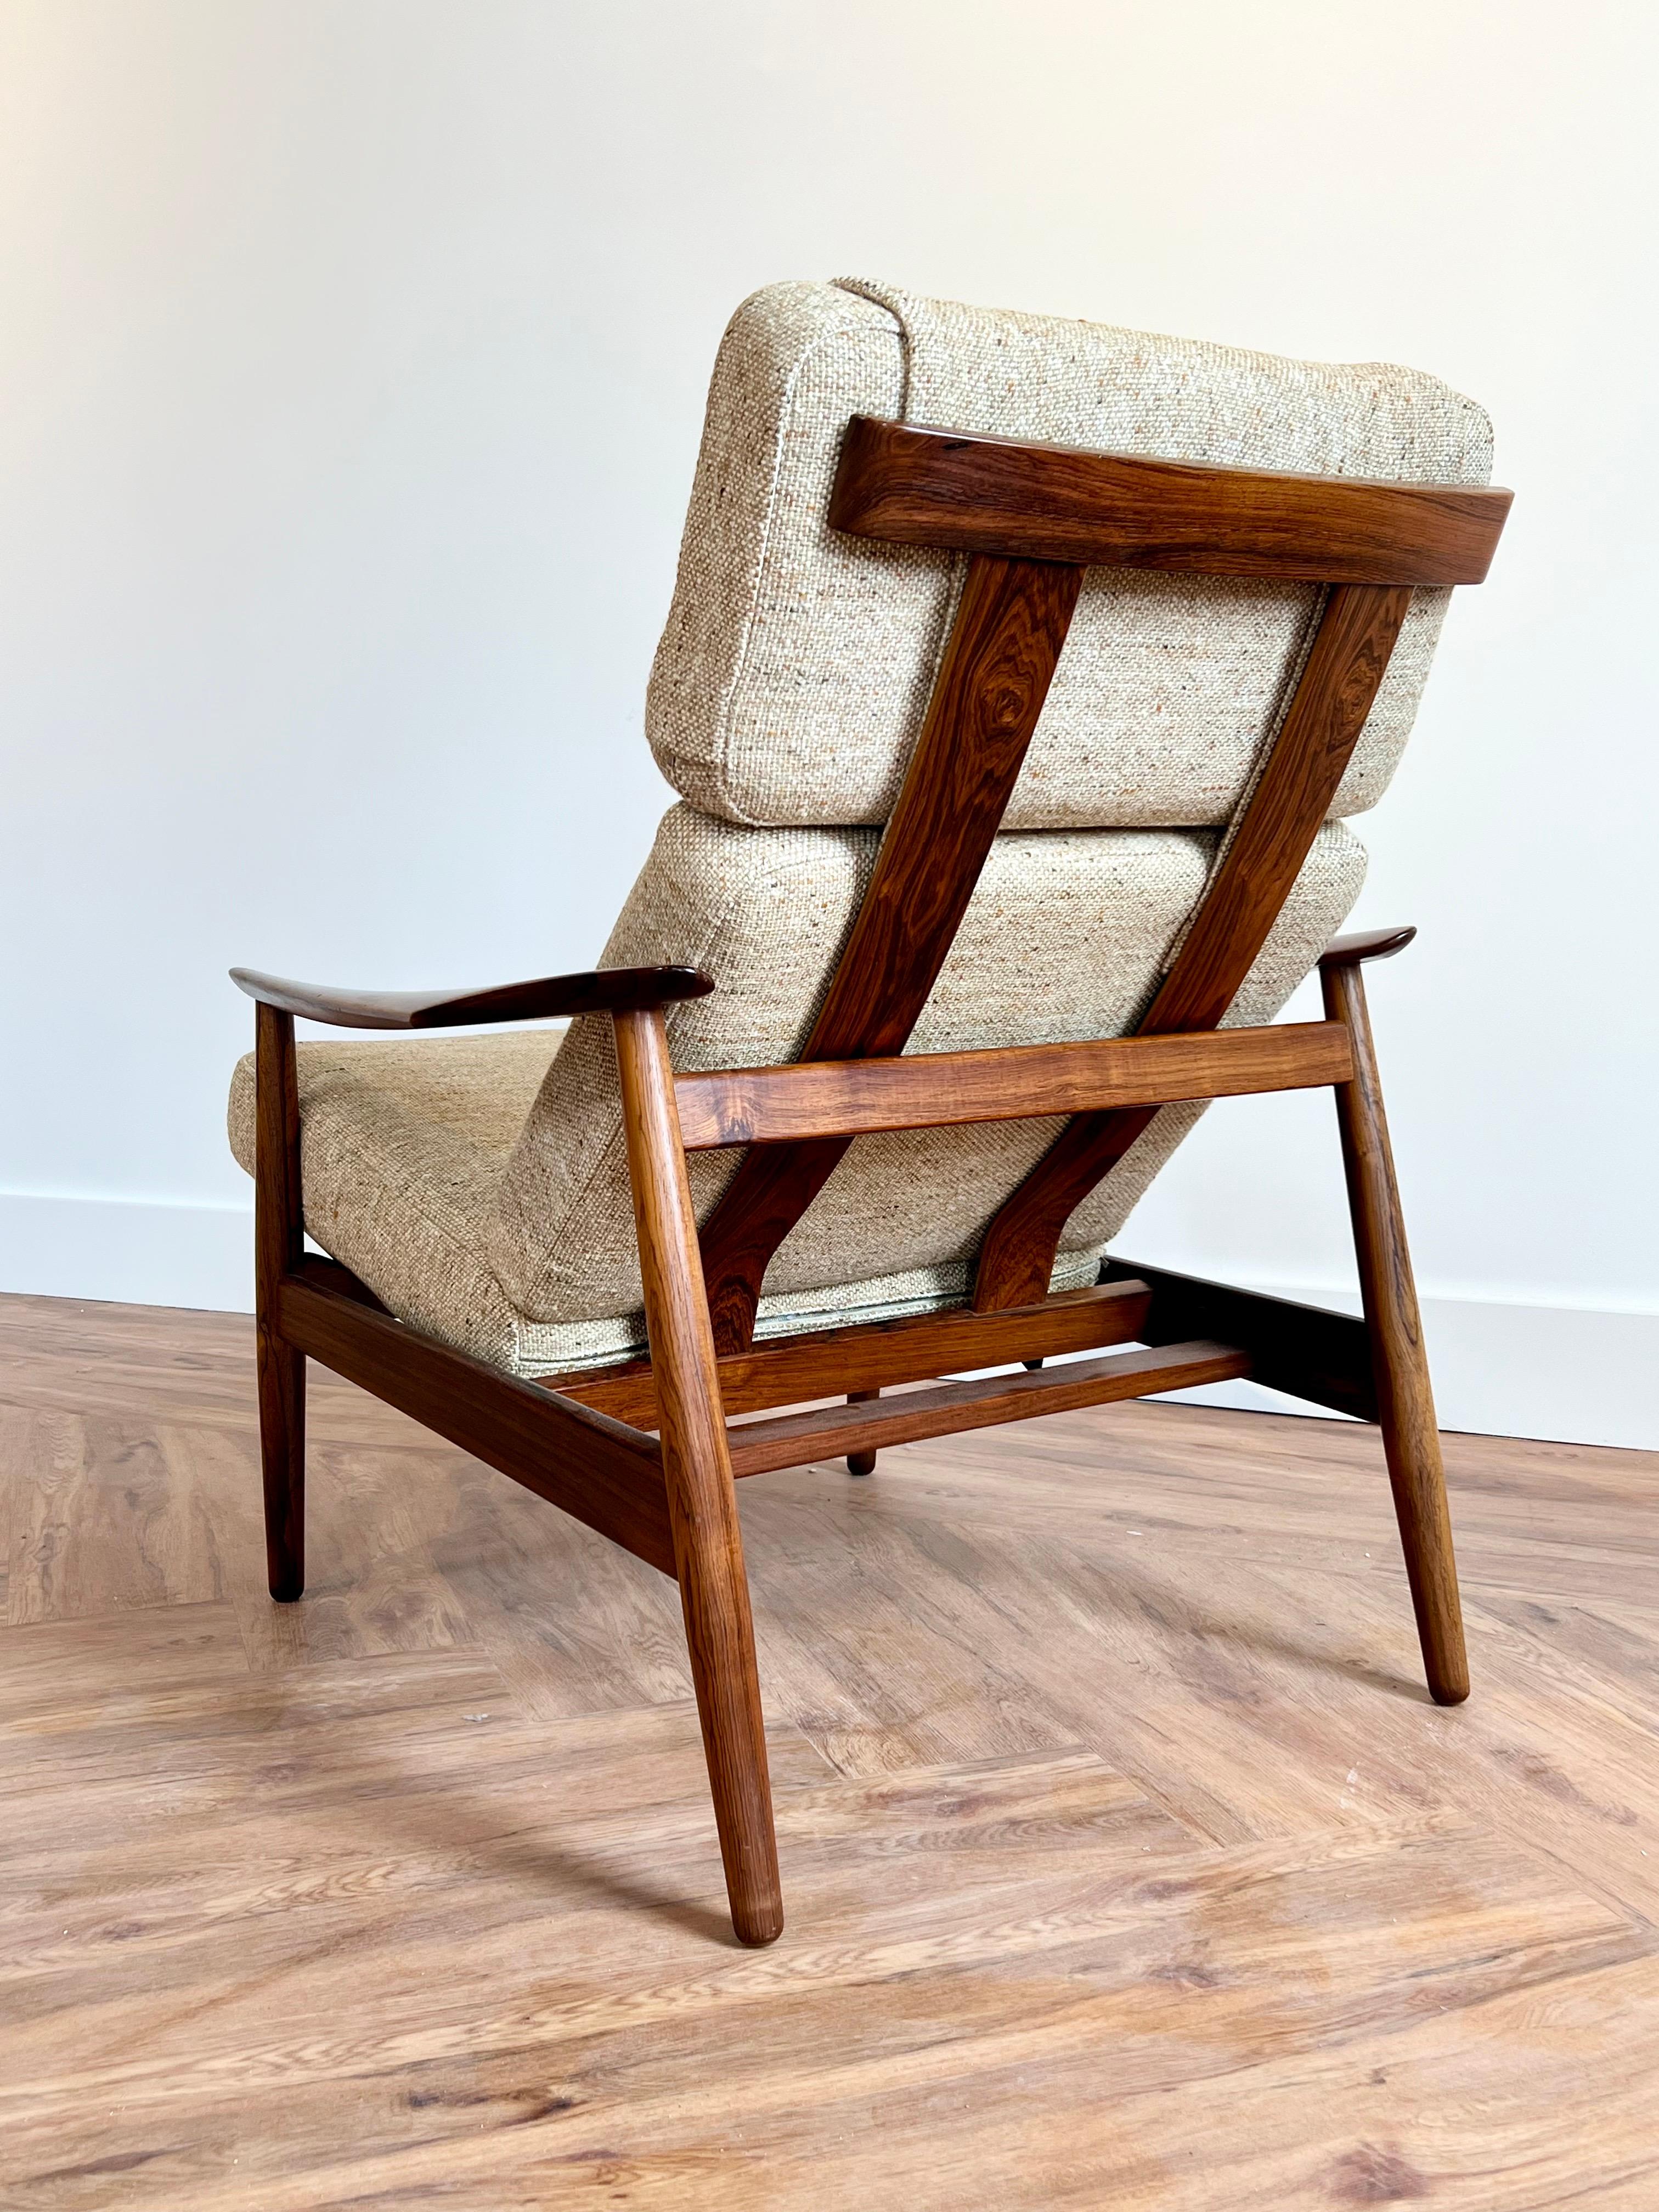 Rare Arne Vodder Rosewood FD164 Adjustable Lounge Chair c1960s In Good Condition For Sale In Oakland, CA